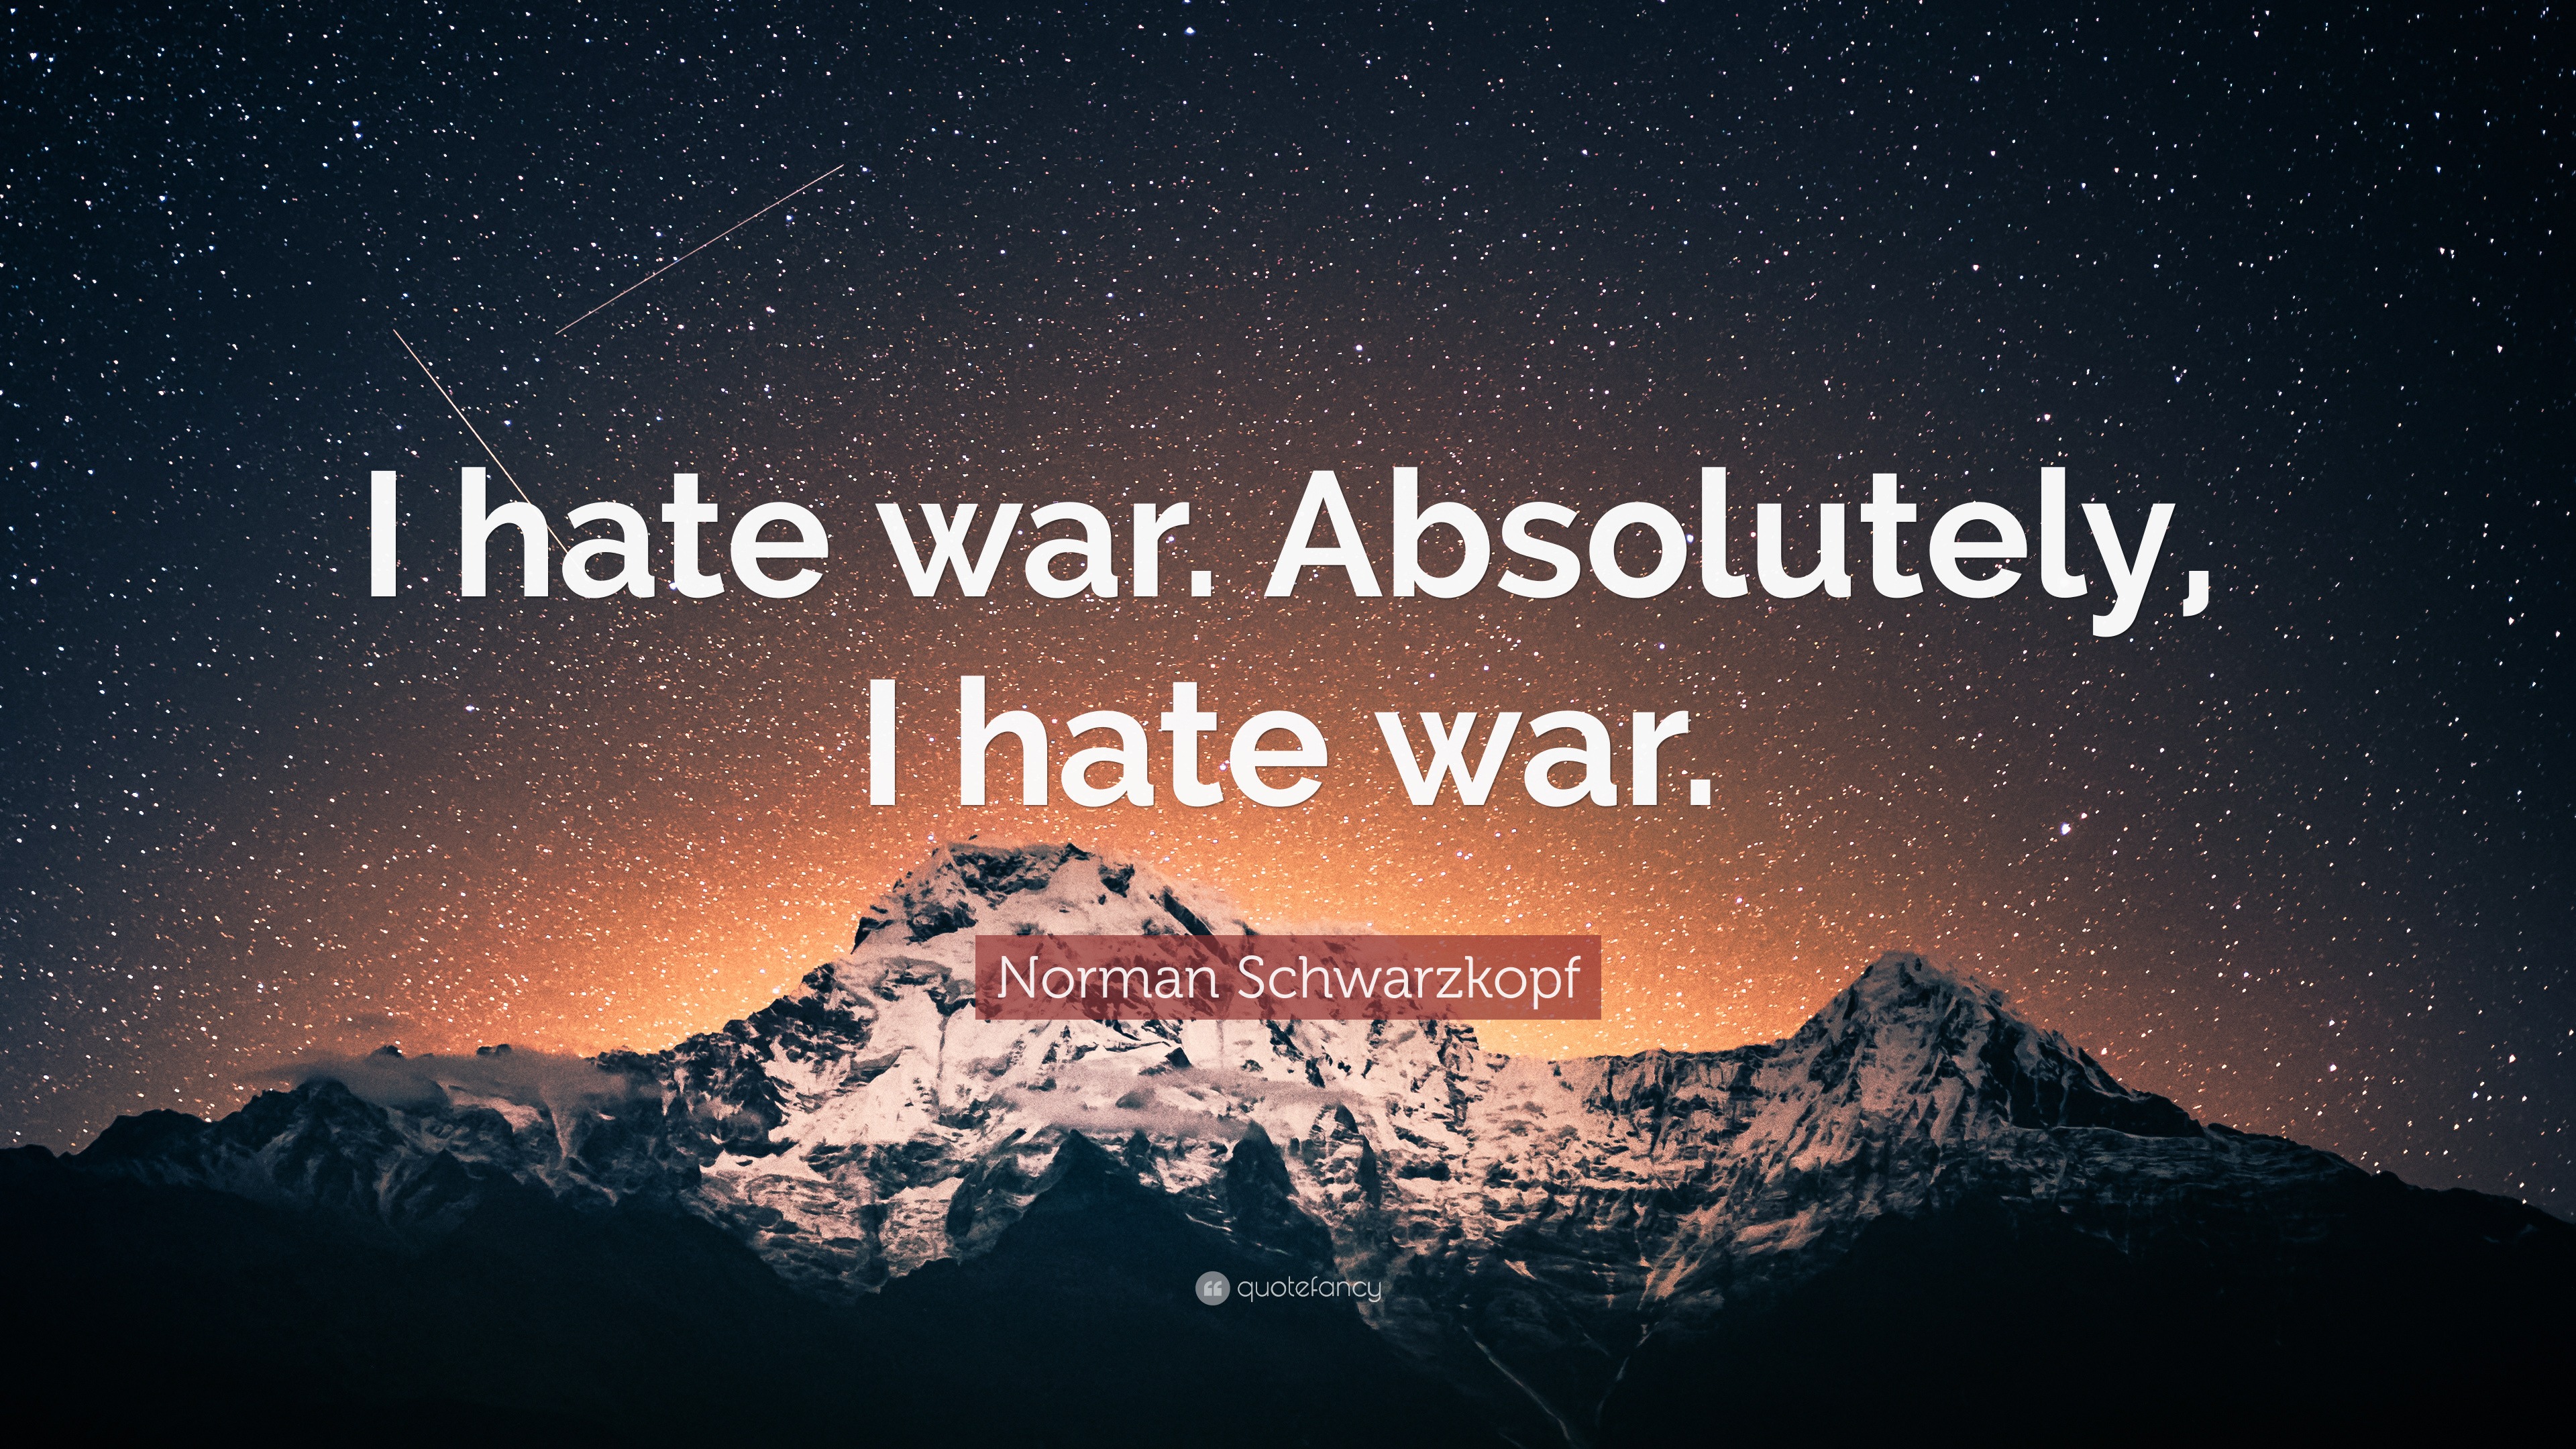 Norman Schwarzkopf Quote: “I hate war. Absolutely, I hate war.”